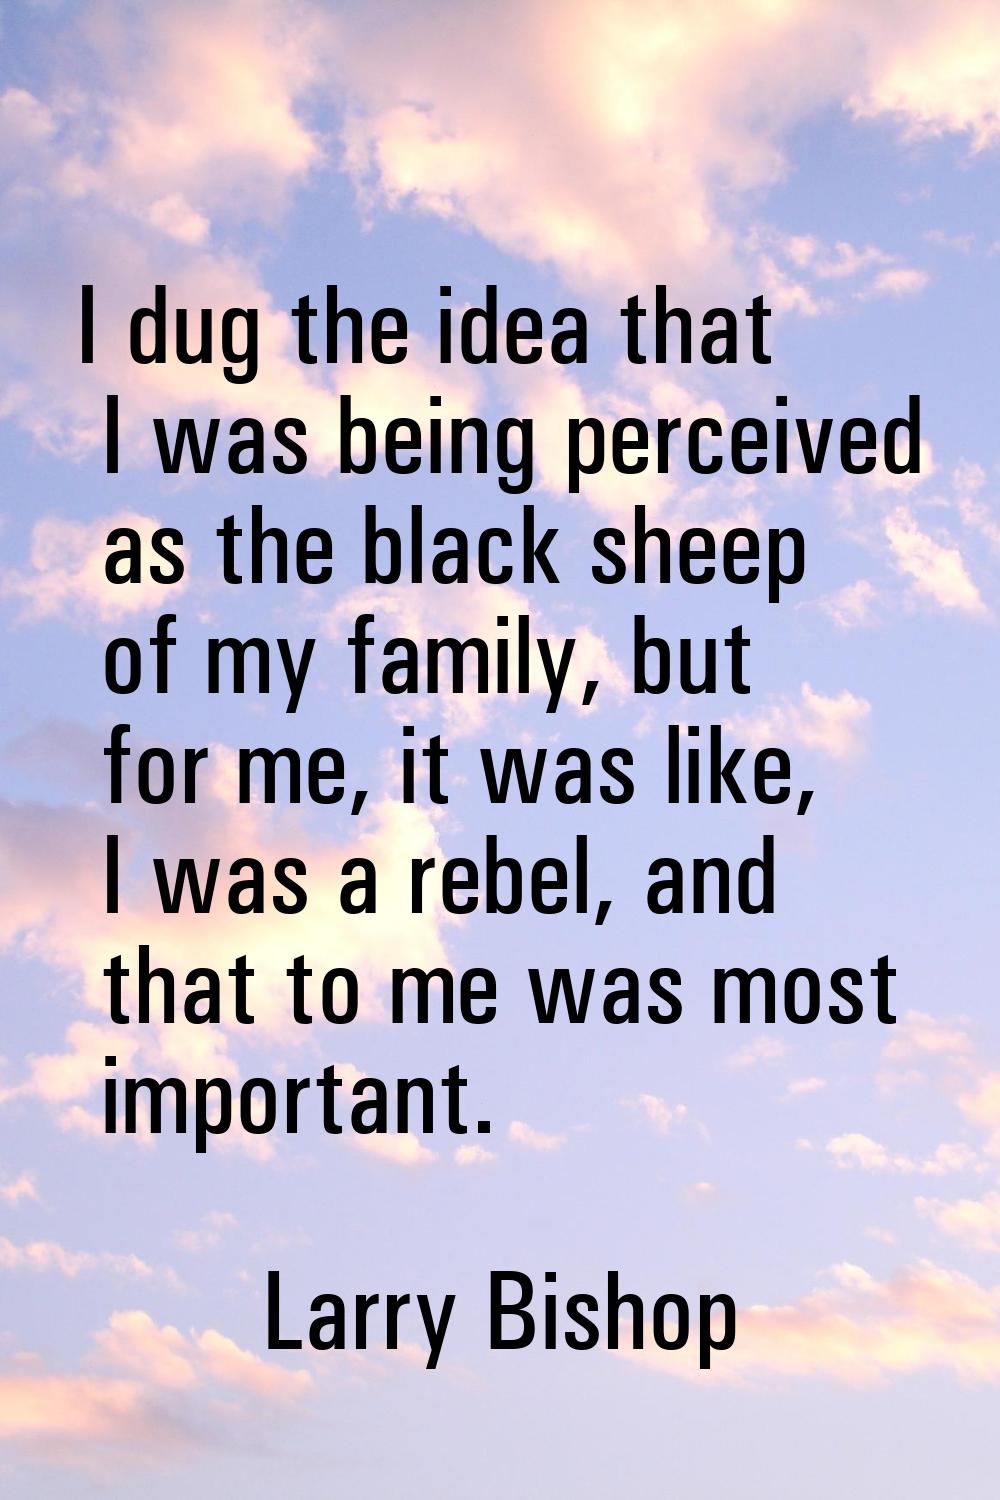 I dug the idea that I was being perceived as the black sheep of my family, but for me, it was like,